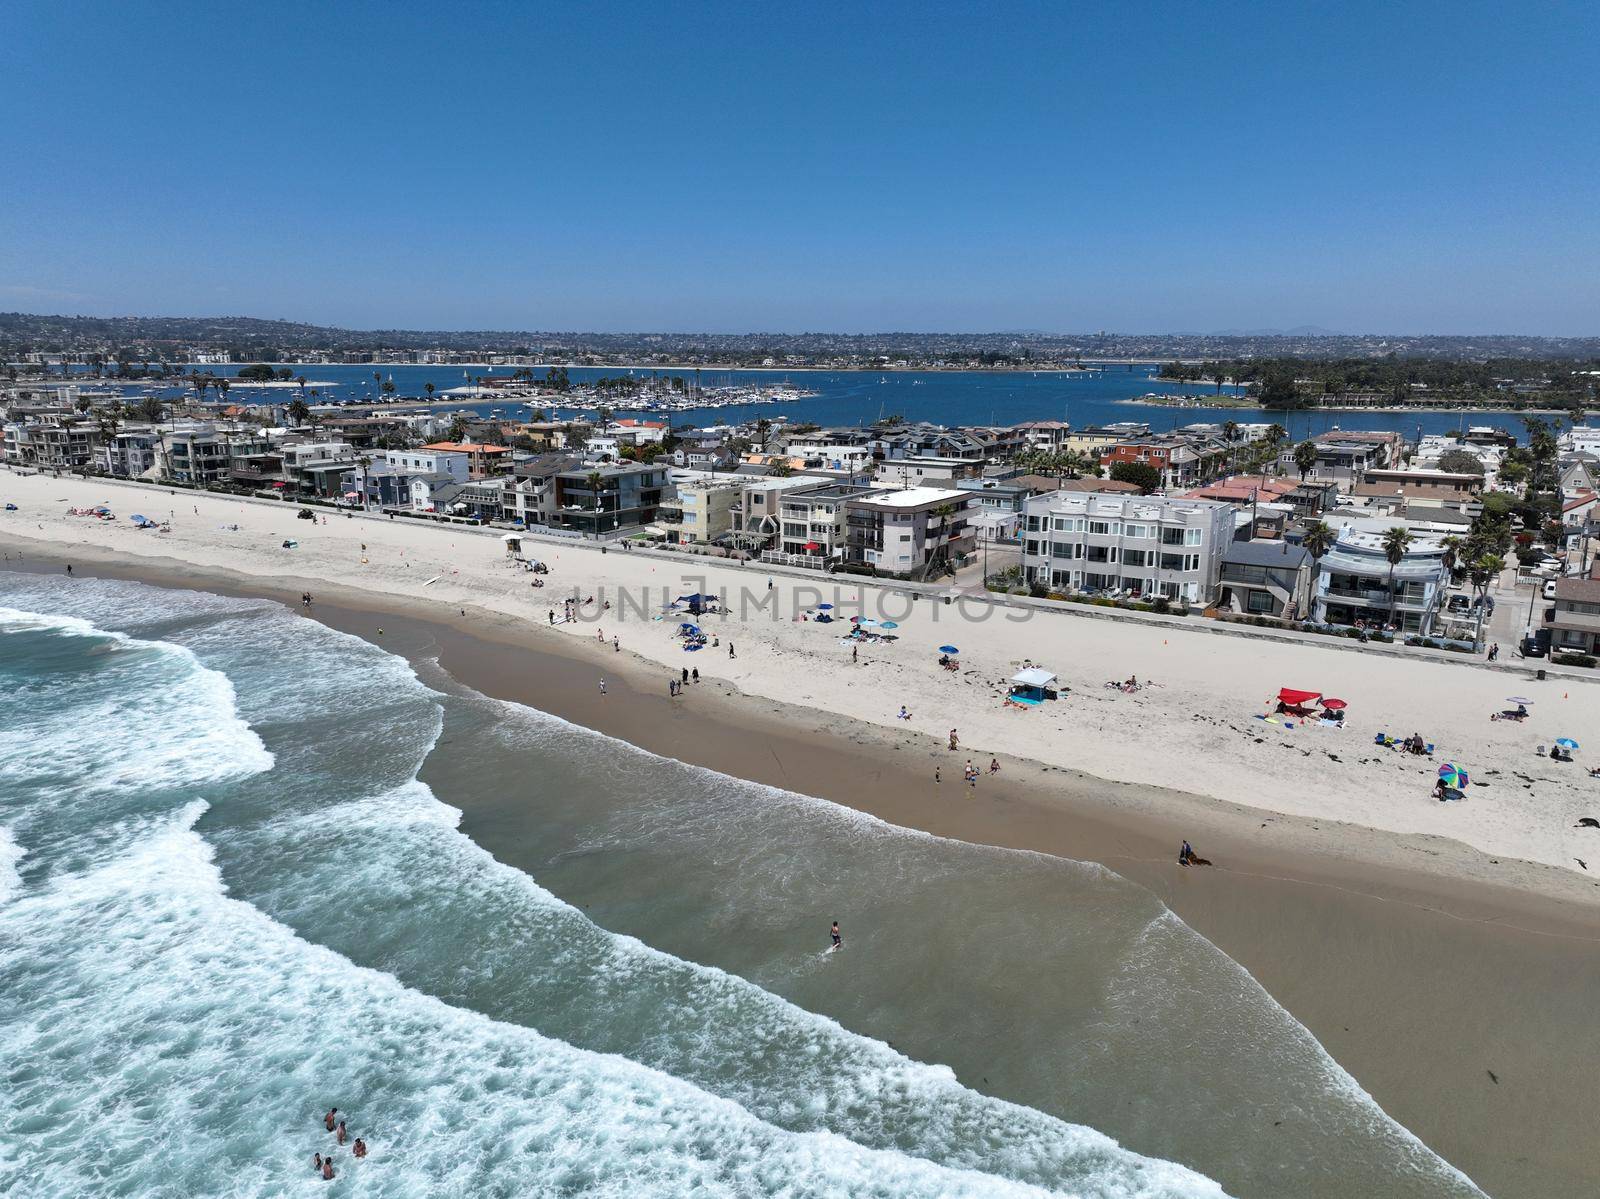 Aerial view of Mission Bay and beach in San Diego during summer, California. USA. by Bonandbon